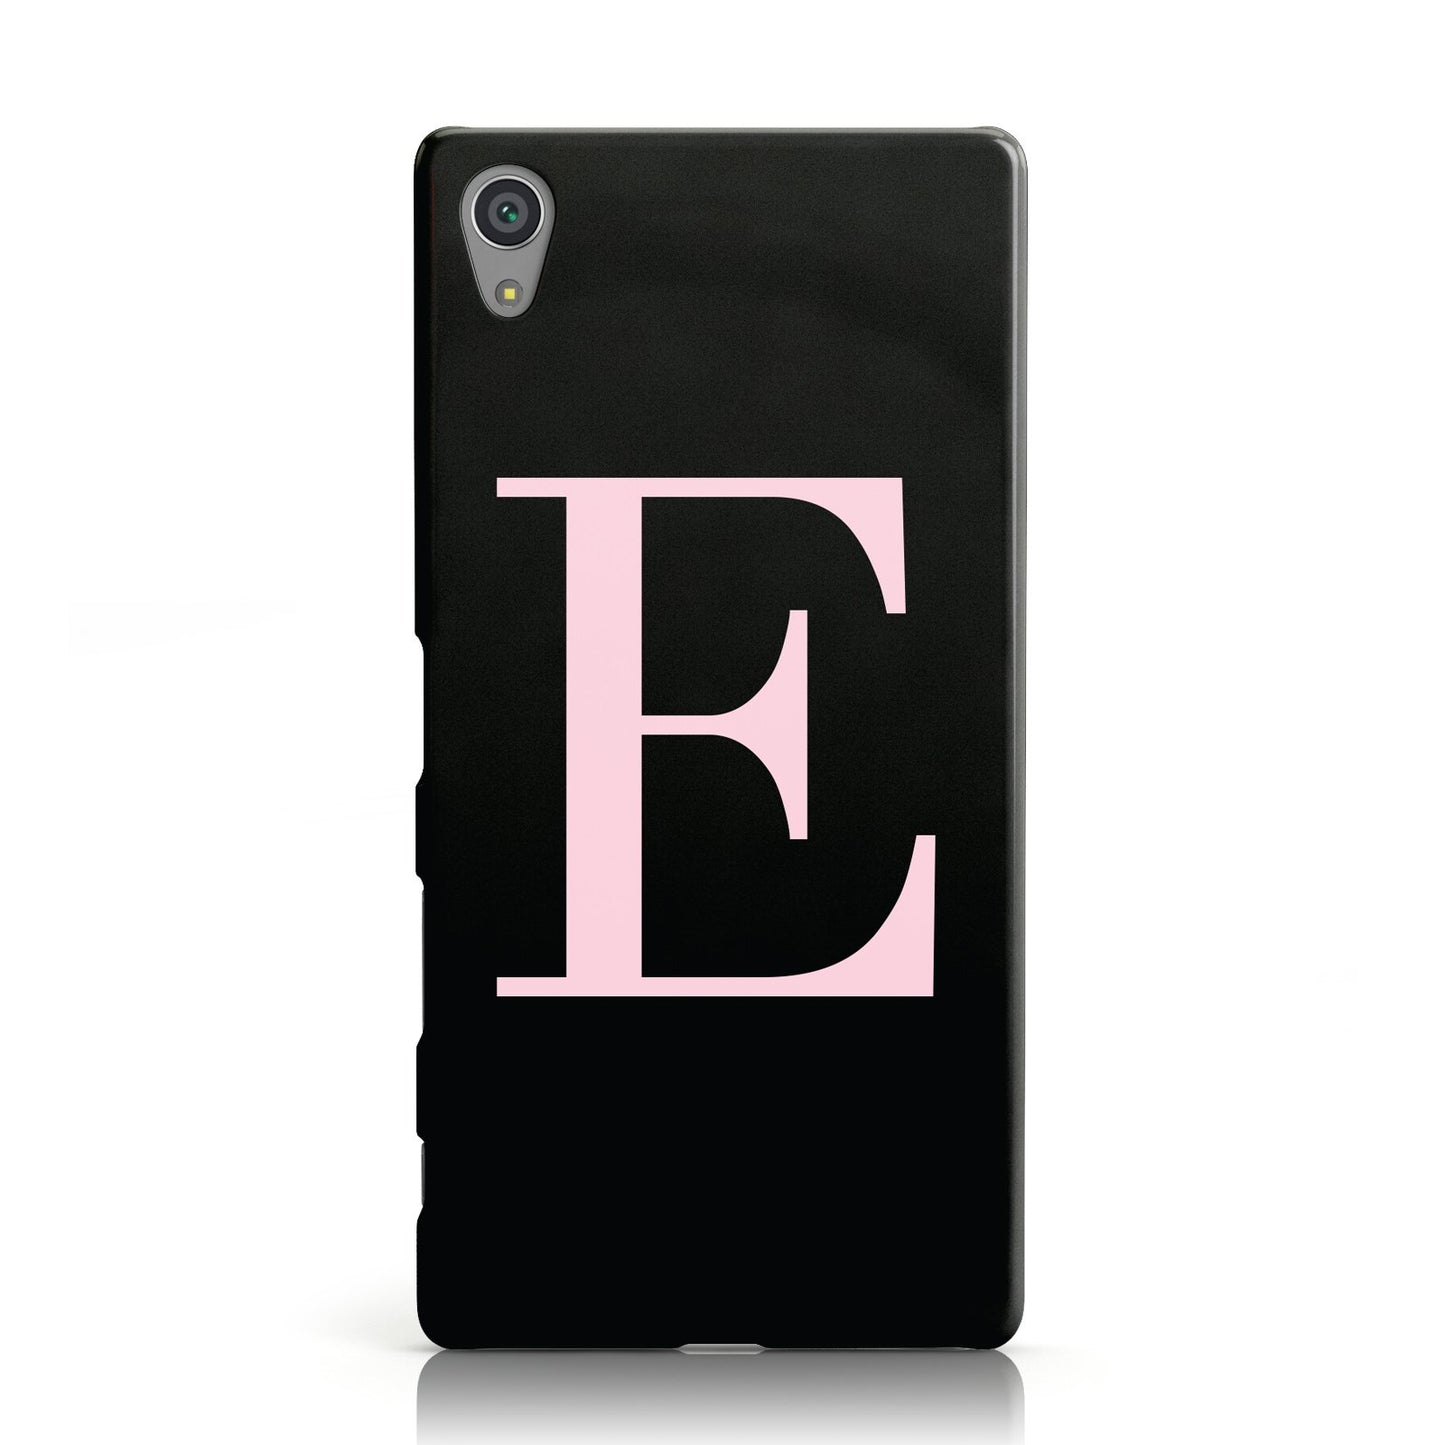 Personalised Black With Pink Monogram Sony Xperia Case